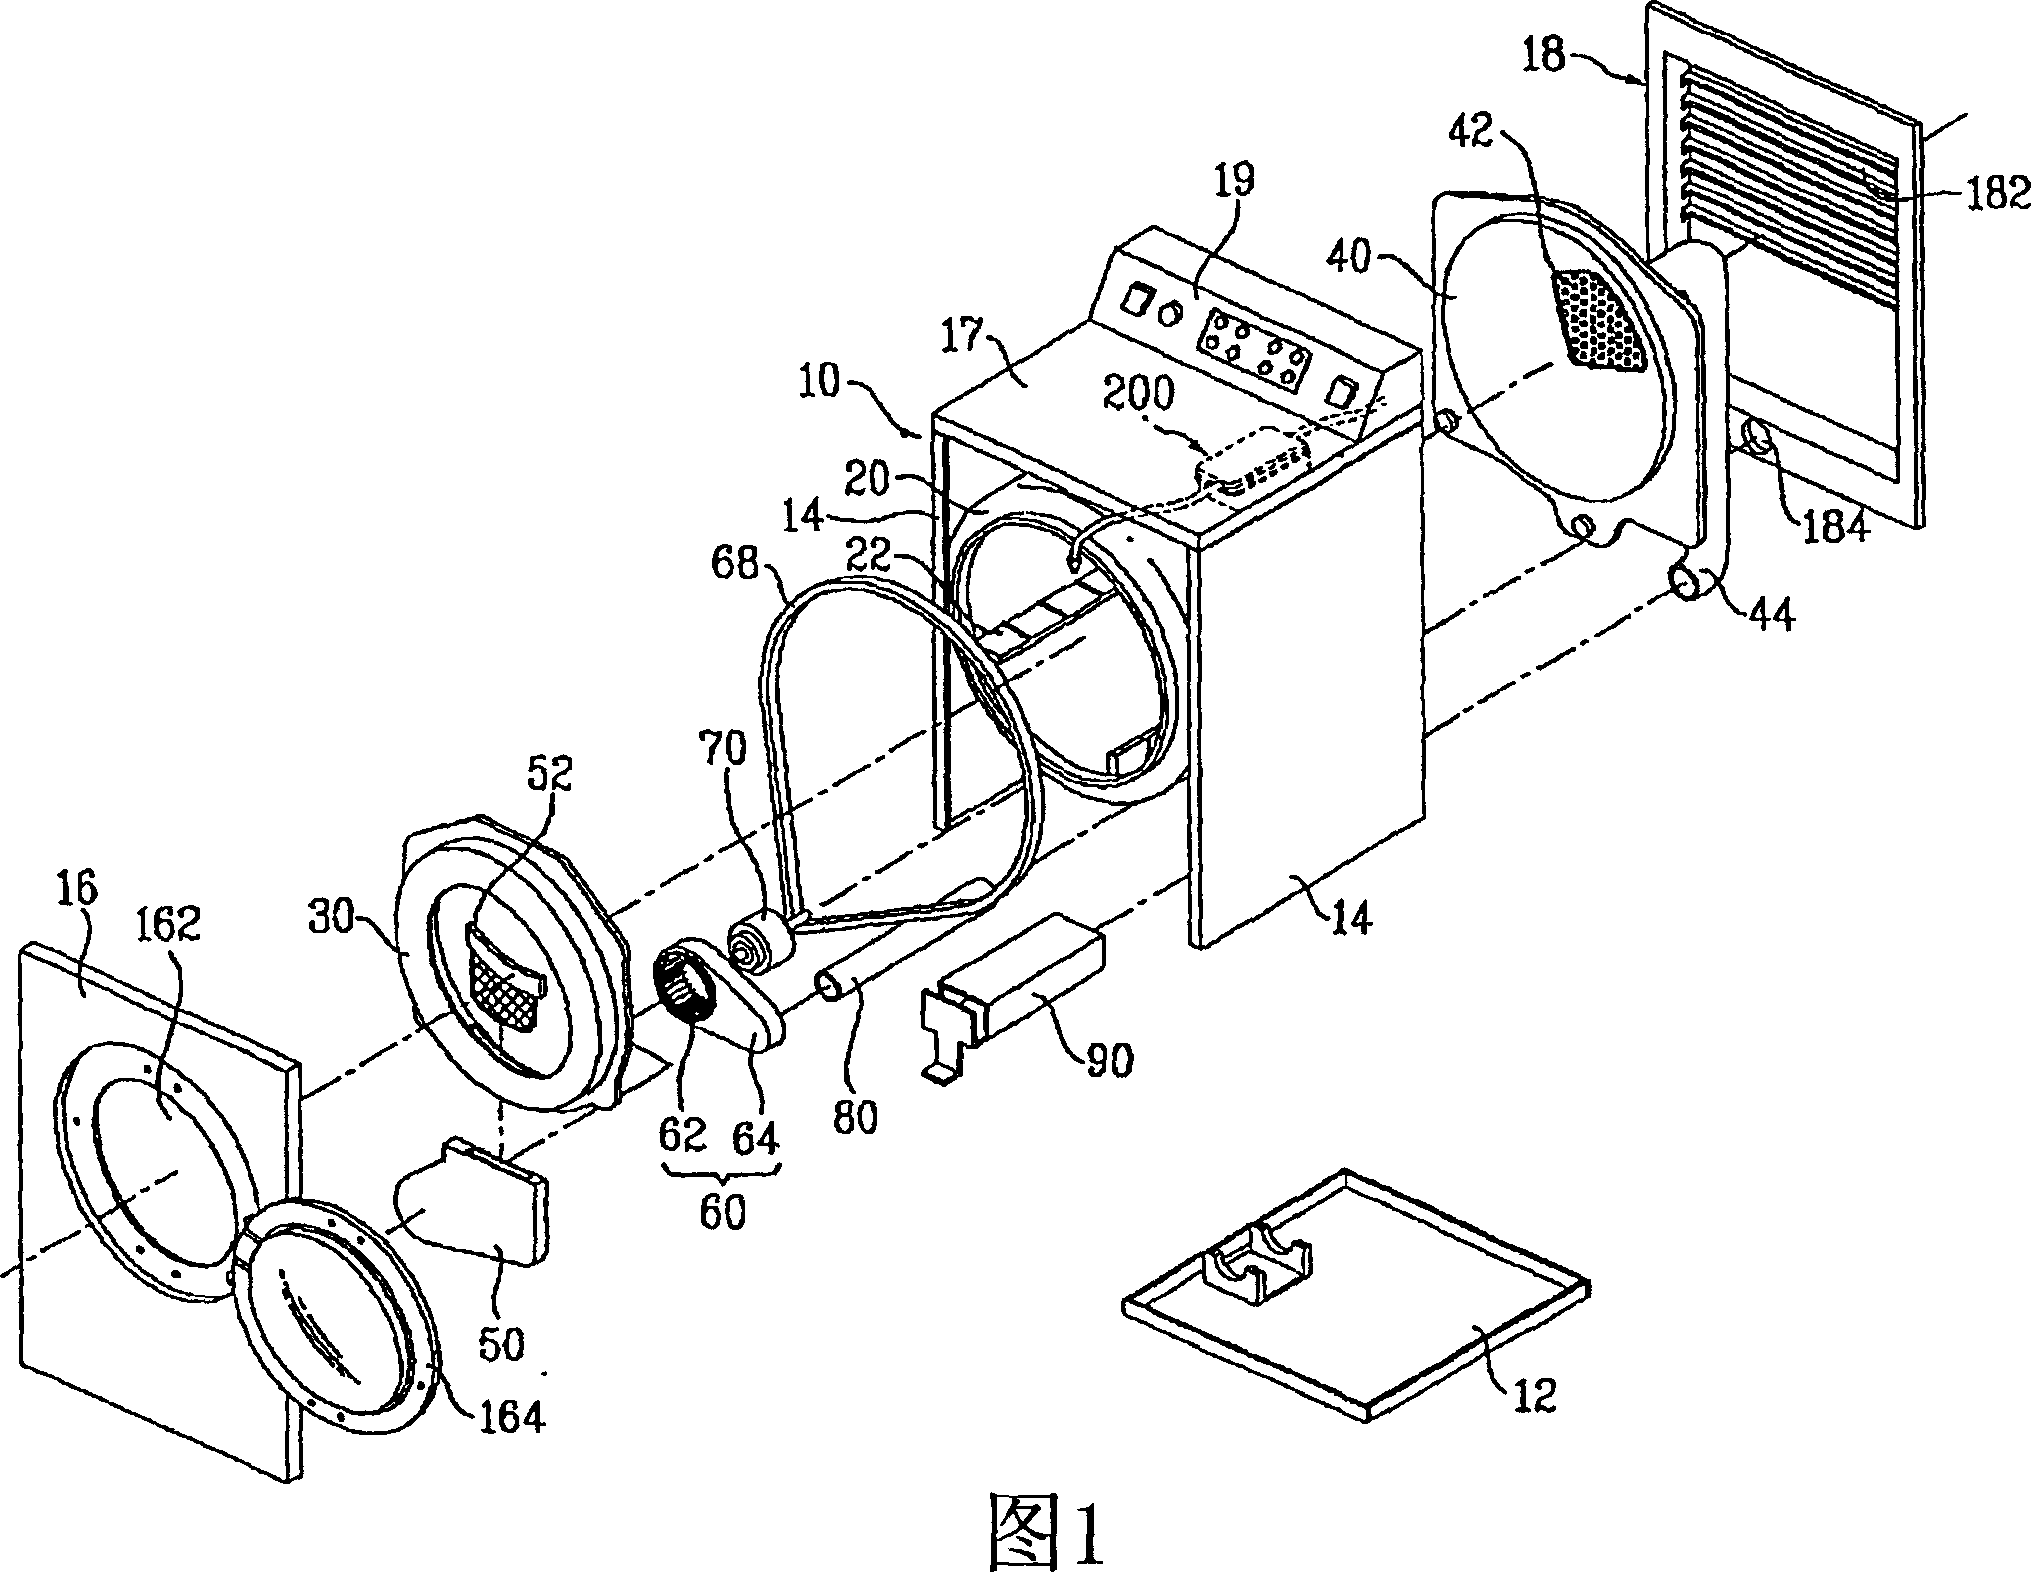 Dryer and method for controlling same